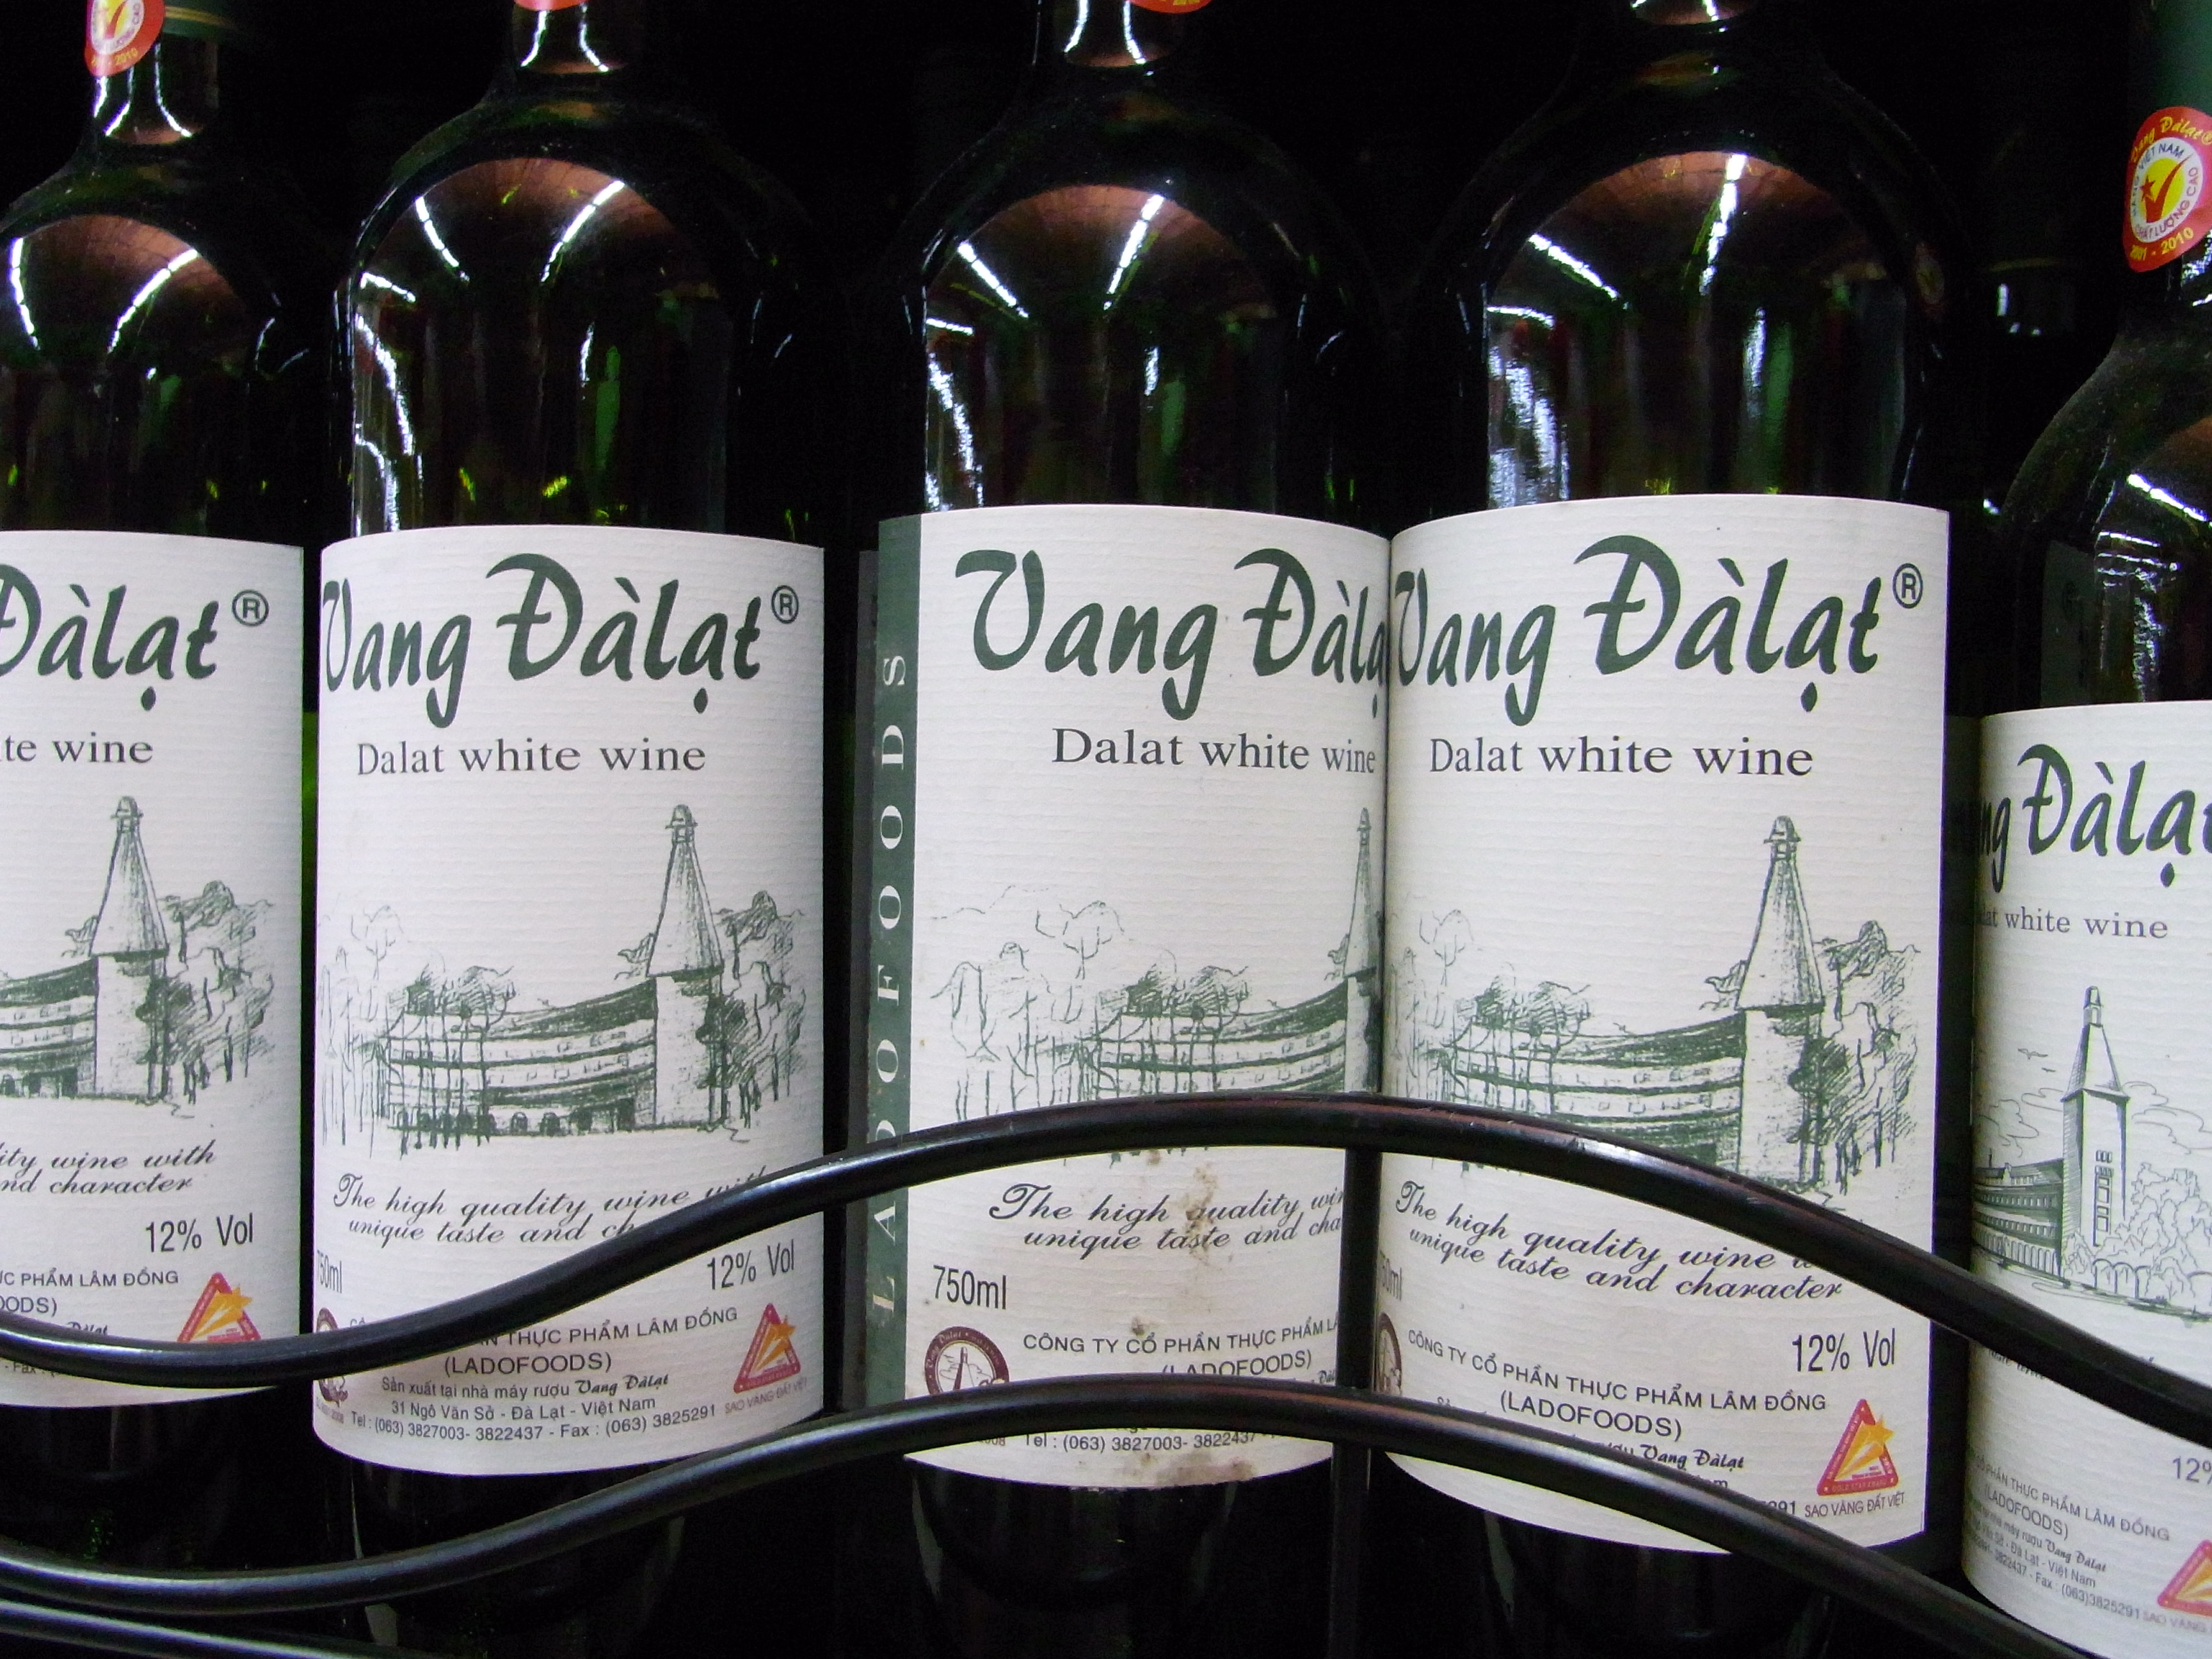 Dalat Wine are available in red and white